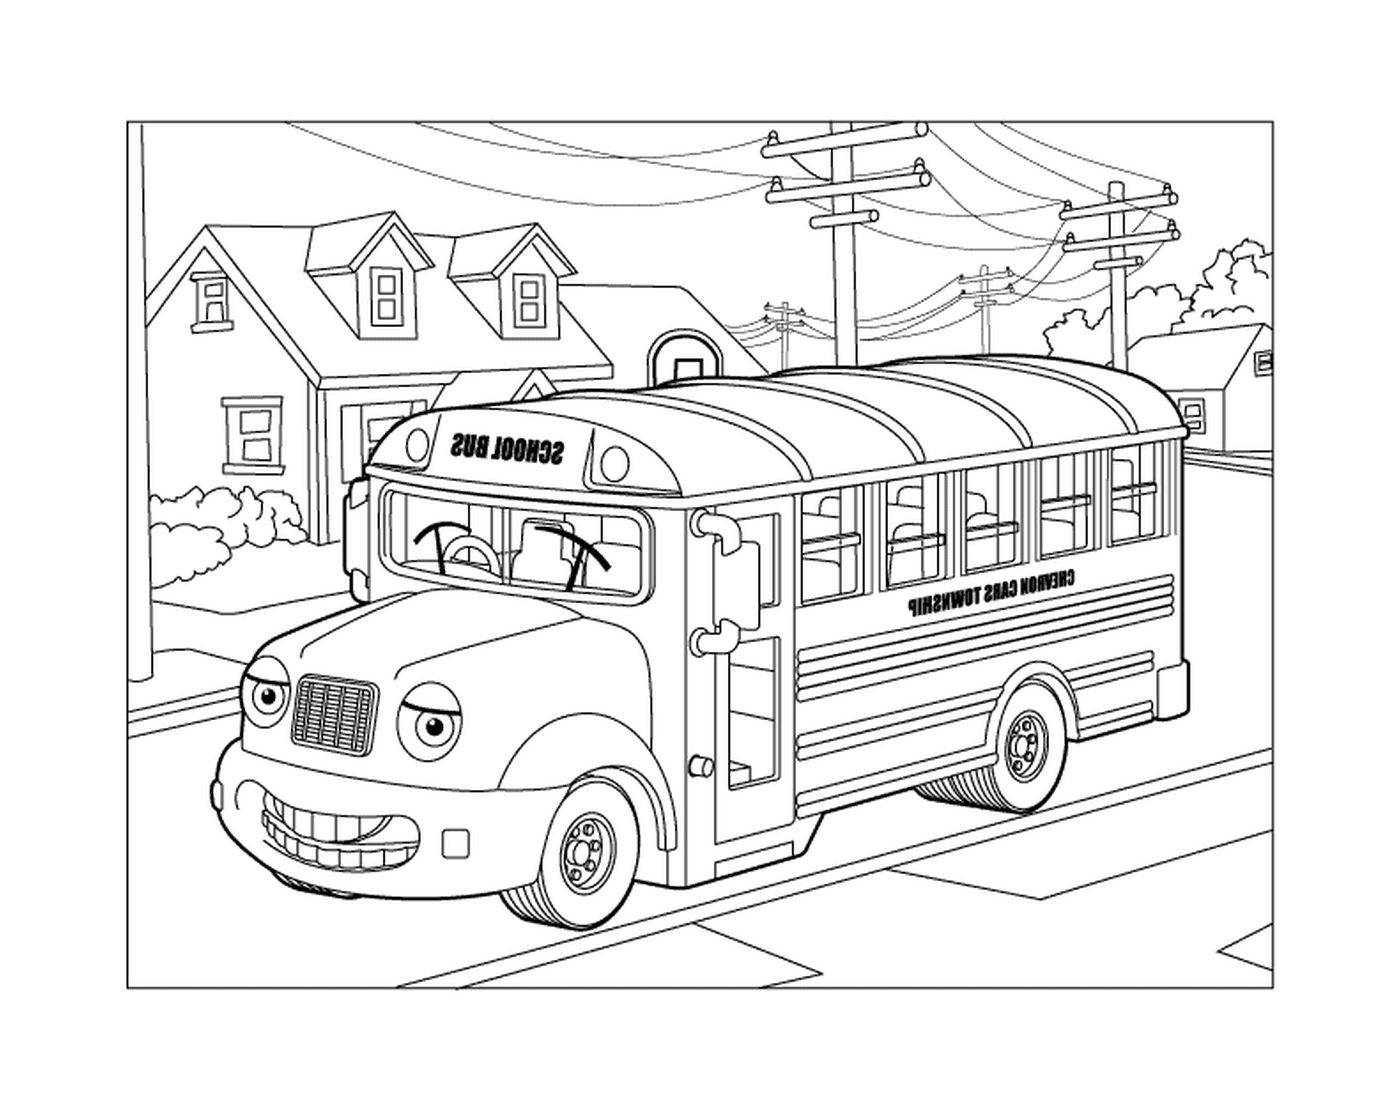  A school bus driving on the street 